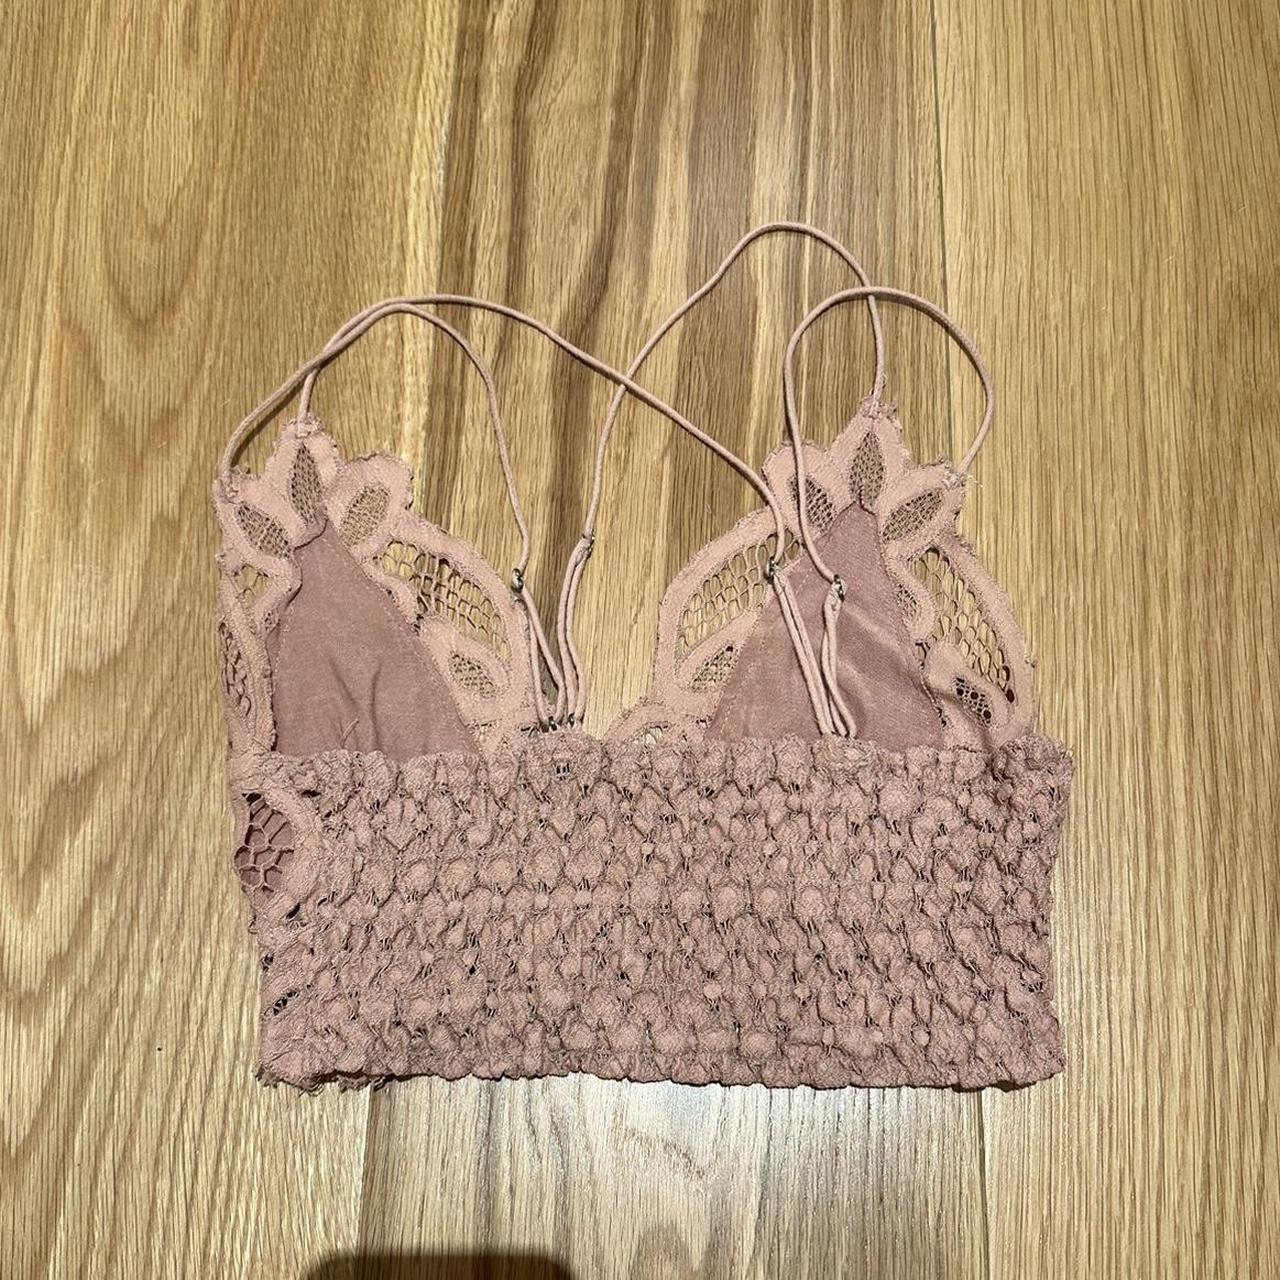 light pink free people cami/bralette! marked as a xs